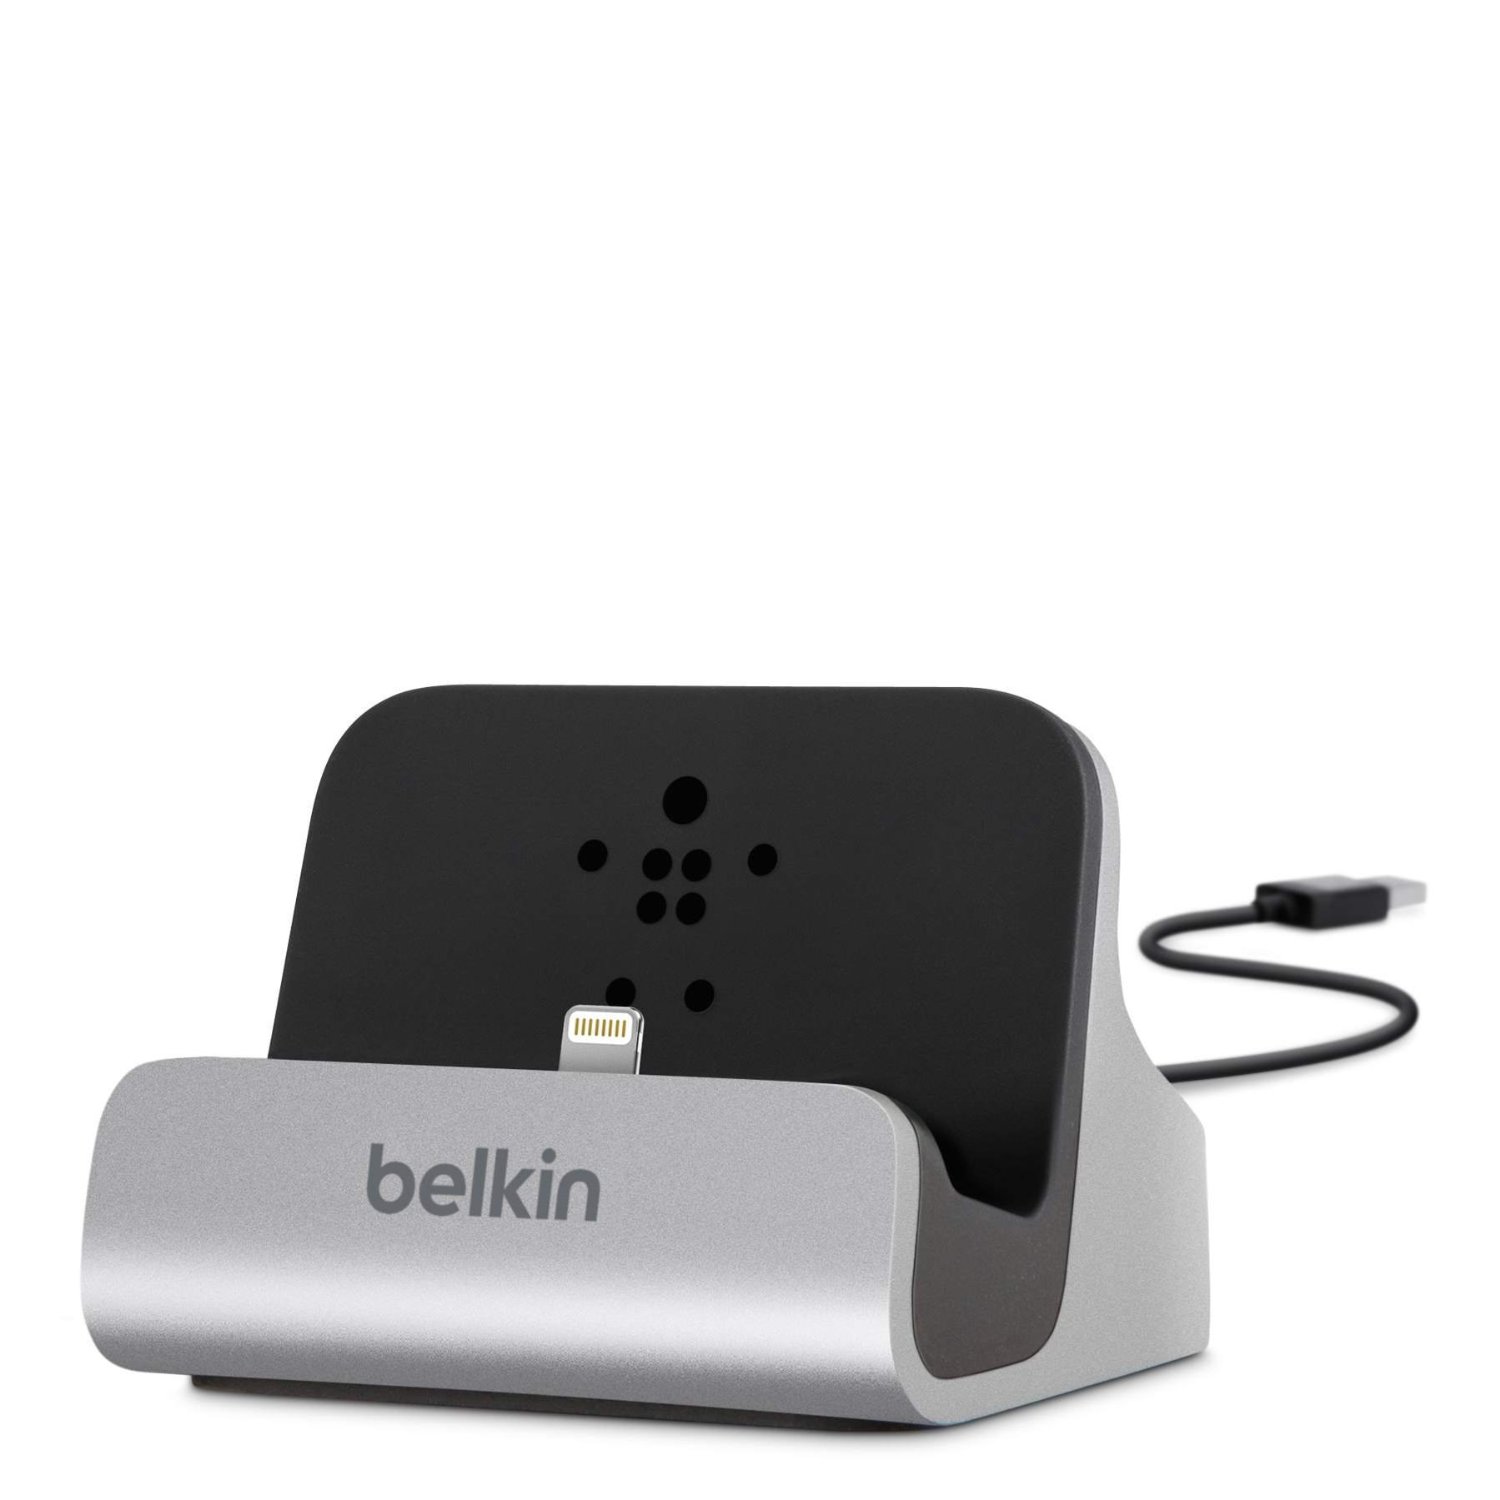 Belkin Charge and Sync Dock with Lightning Cable Connector for iPhone 5 / 5S / 5c and iPod touch 5th Generation (Silver)